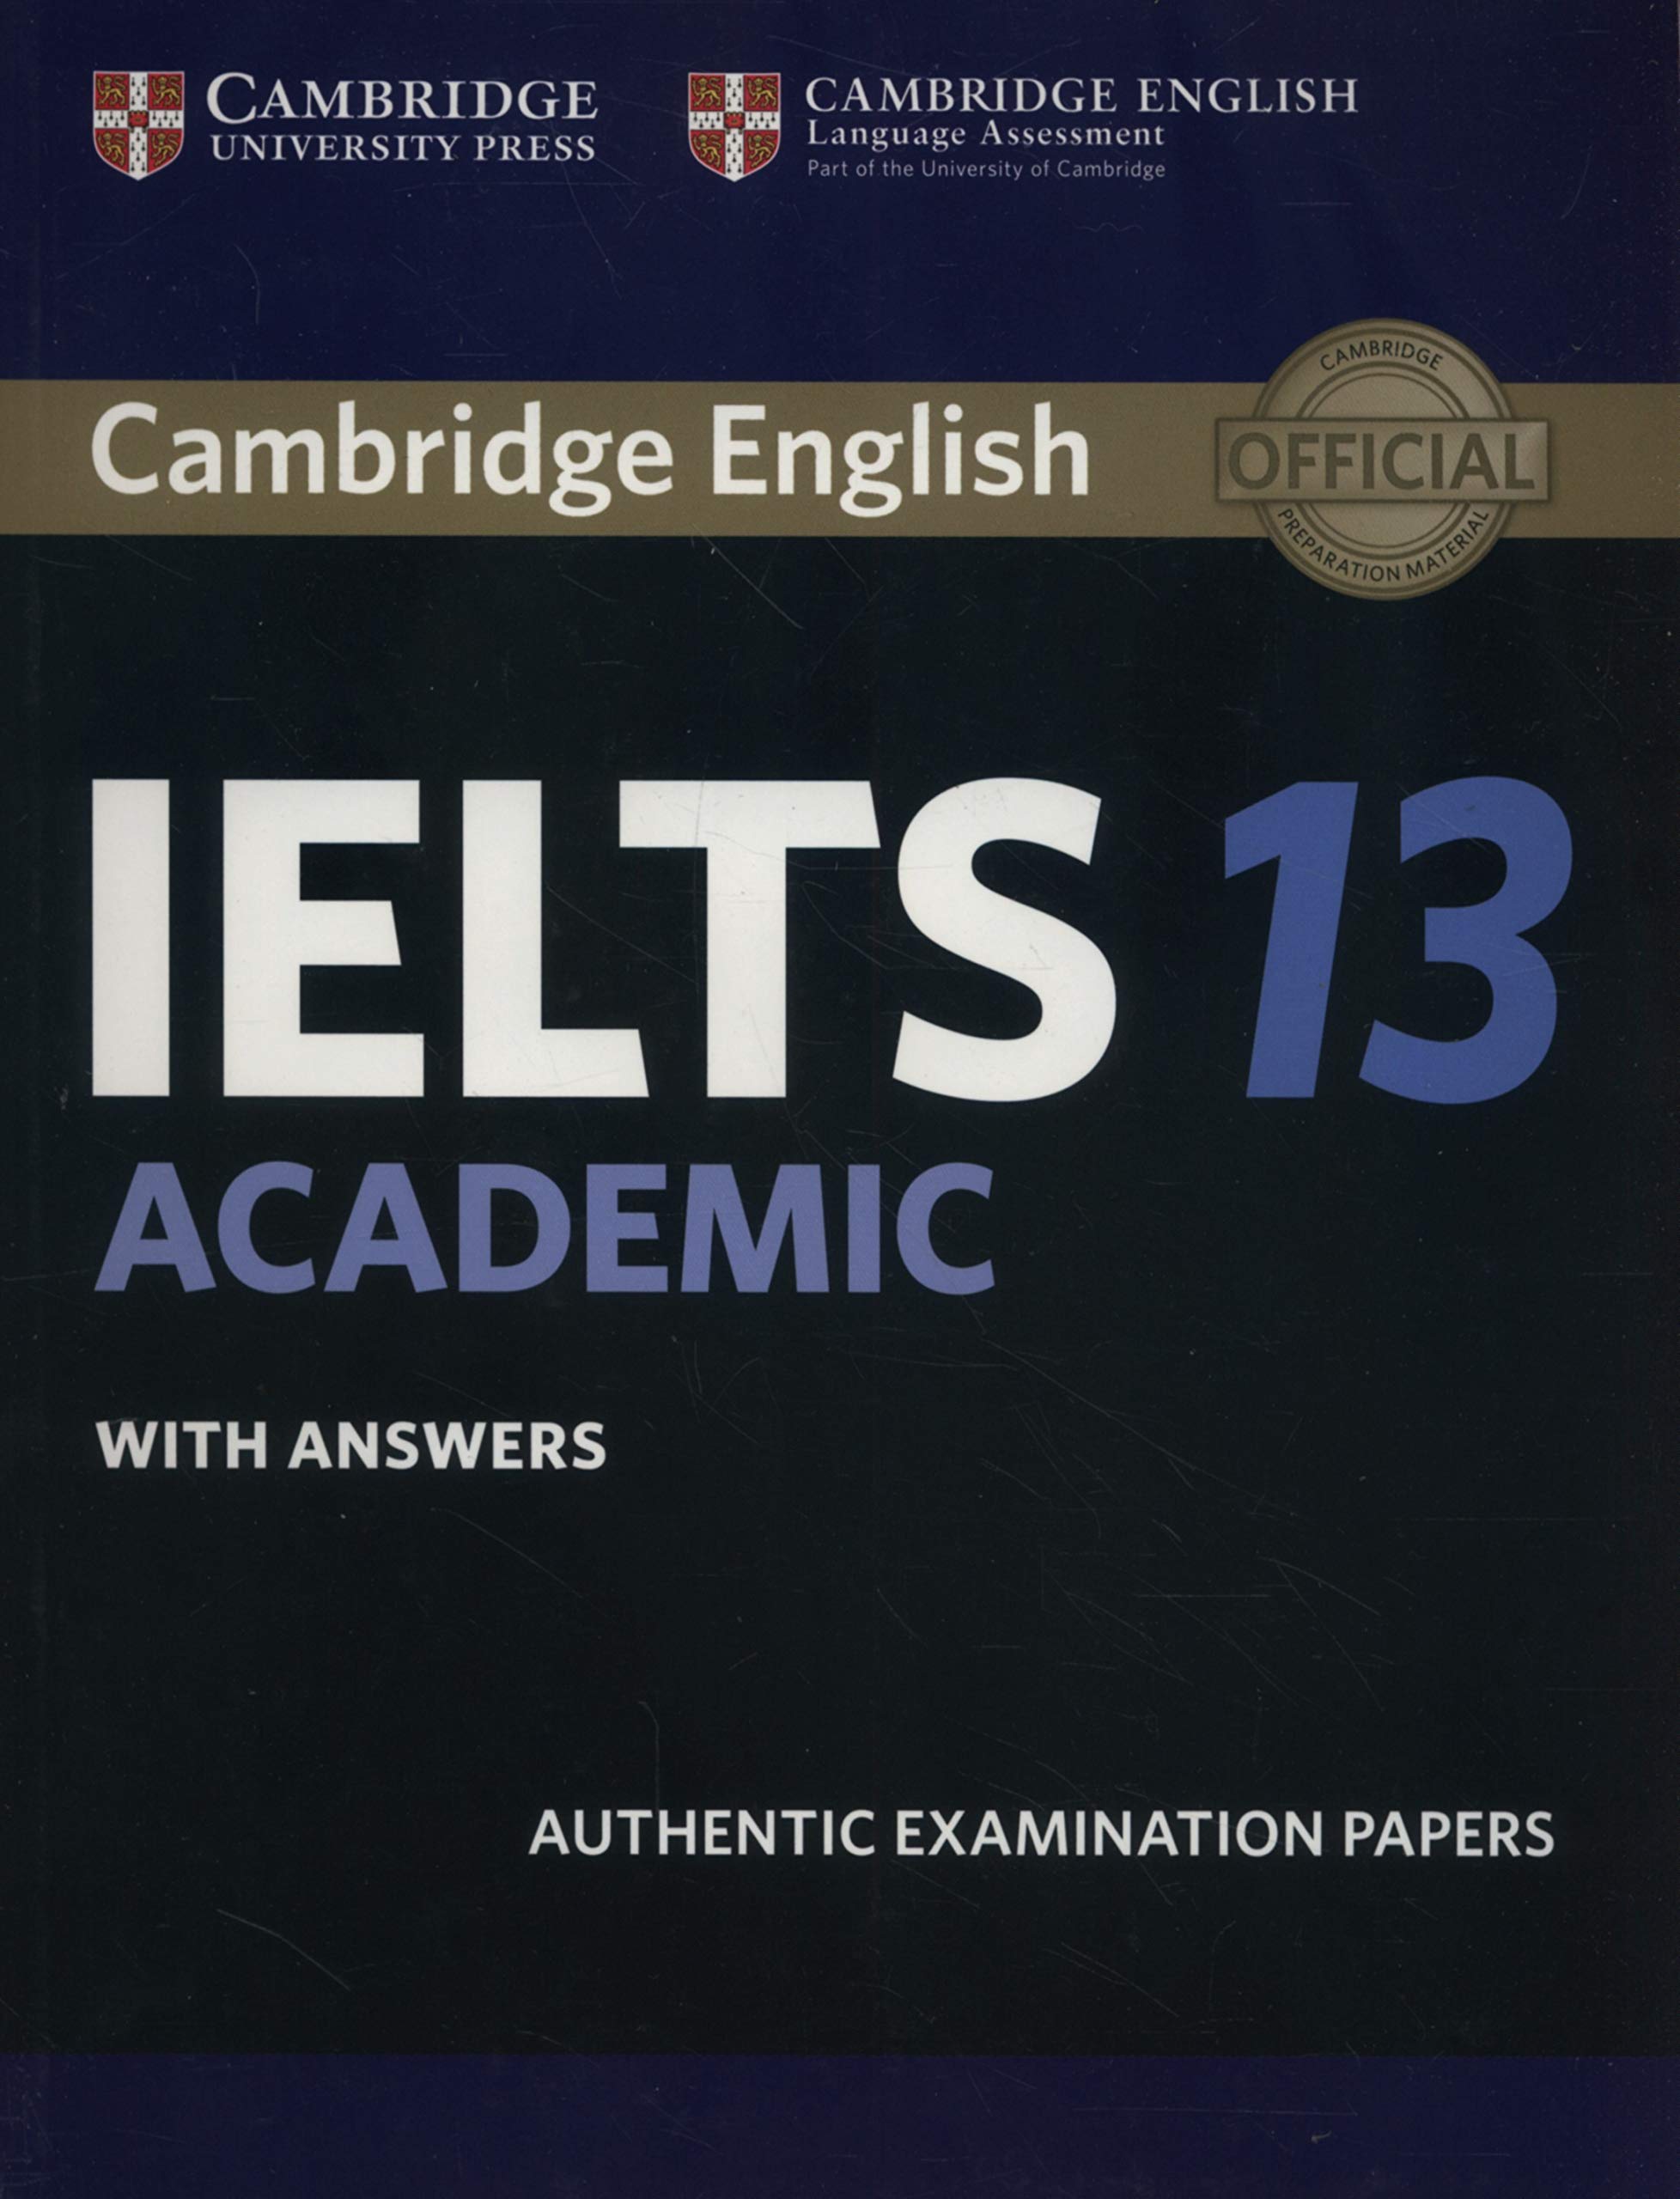 CAMBRIDGE IELTS 13 ACADEMIC Student's Book with Answers 